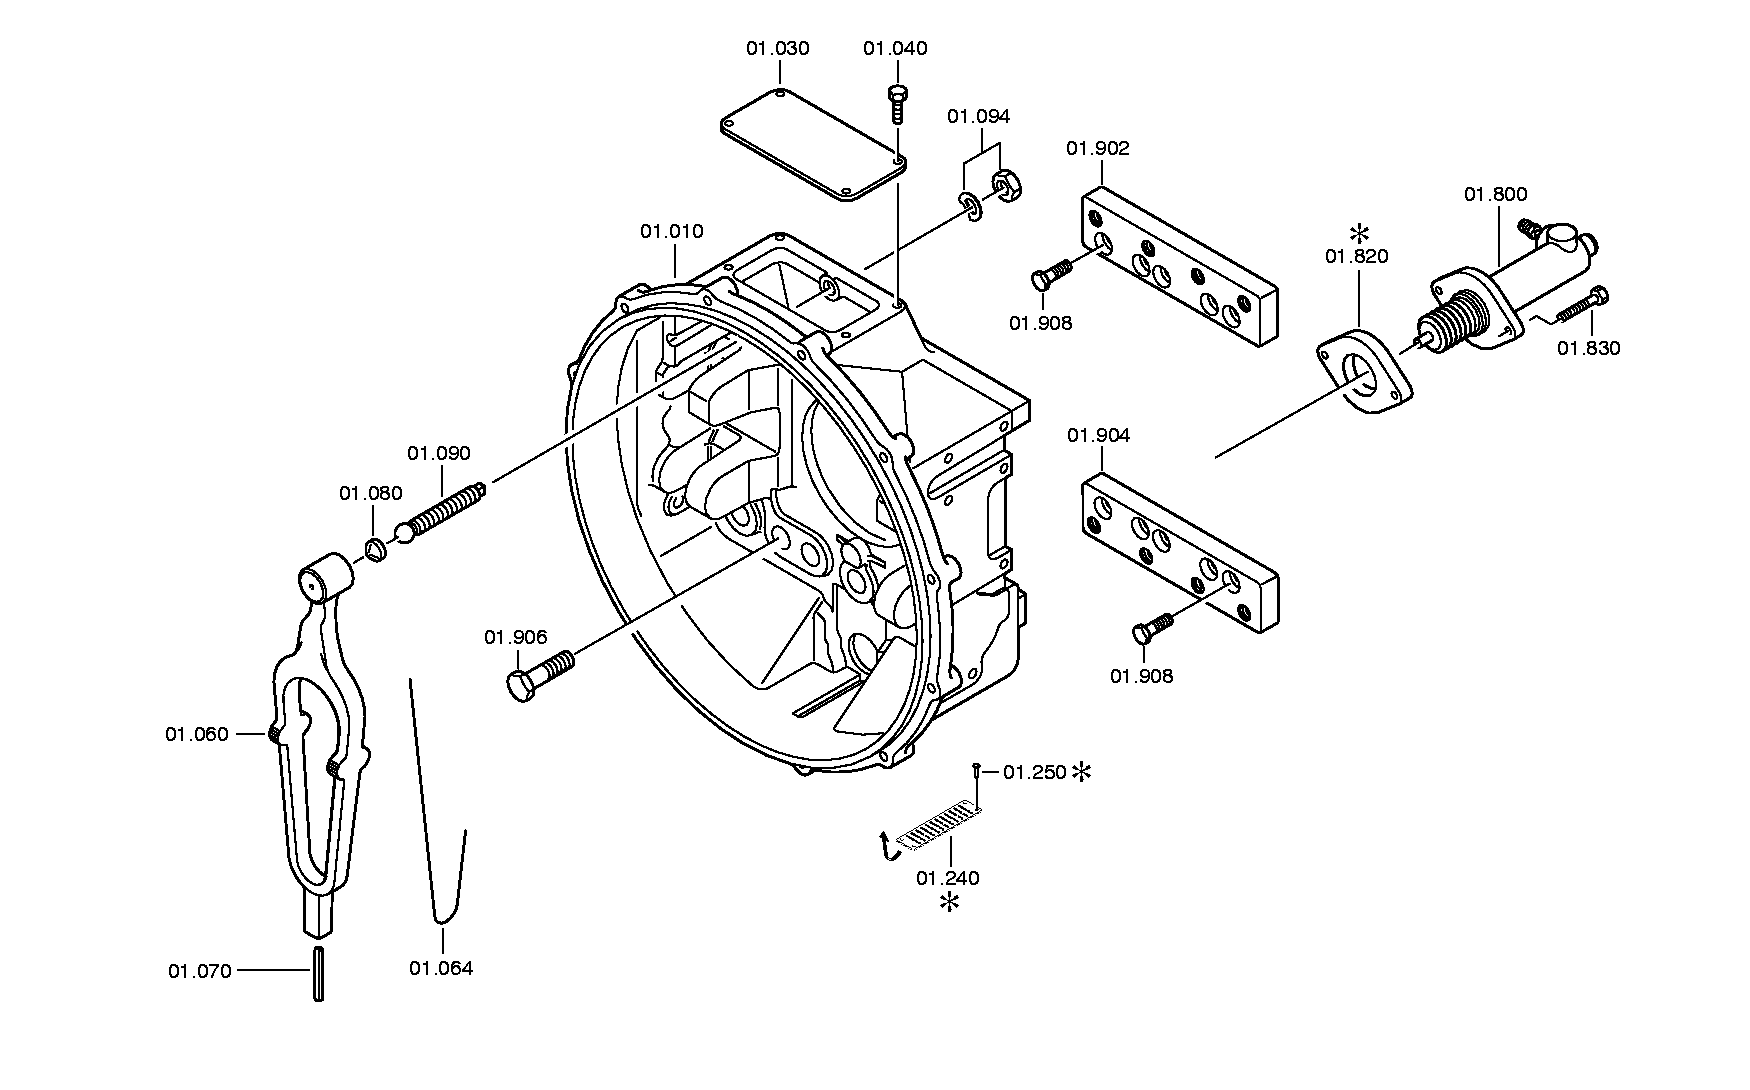 drawing for ASIA MOTORS CO. INC. 409-01-0407 - RELEASE FORK (figure 2)